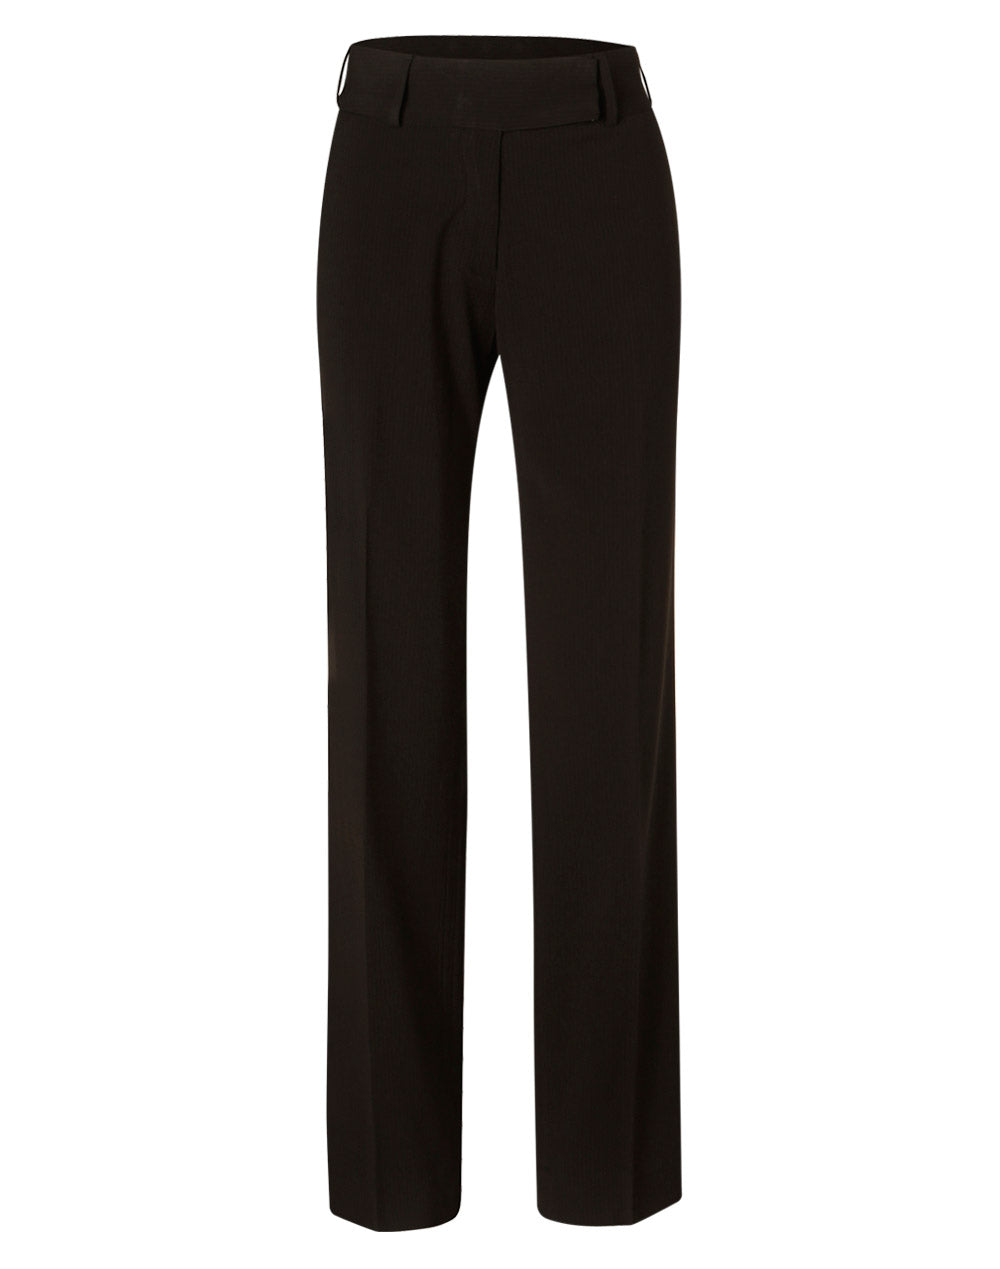 [M9430] Women's Low Rise Pants in Poly/Viscose Stretch Stripe